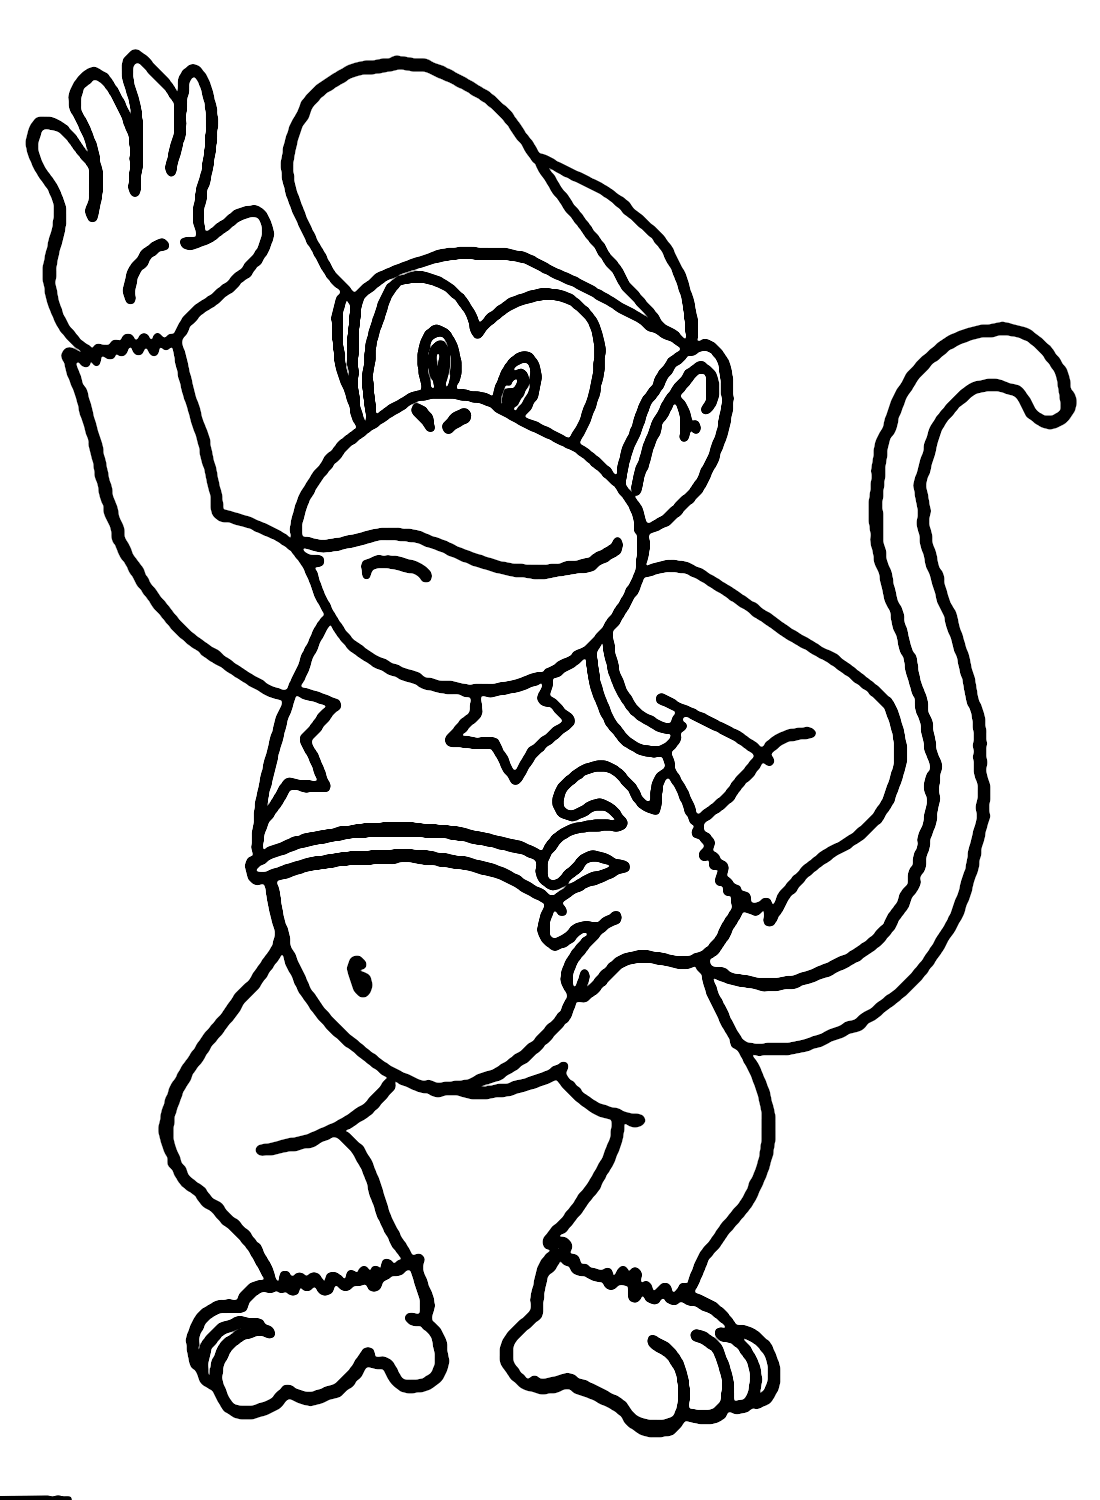 Diddy Kong Images Coloring Page